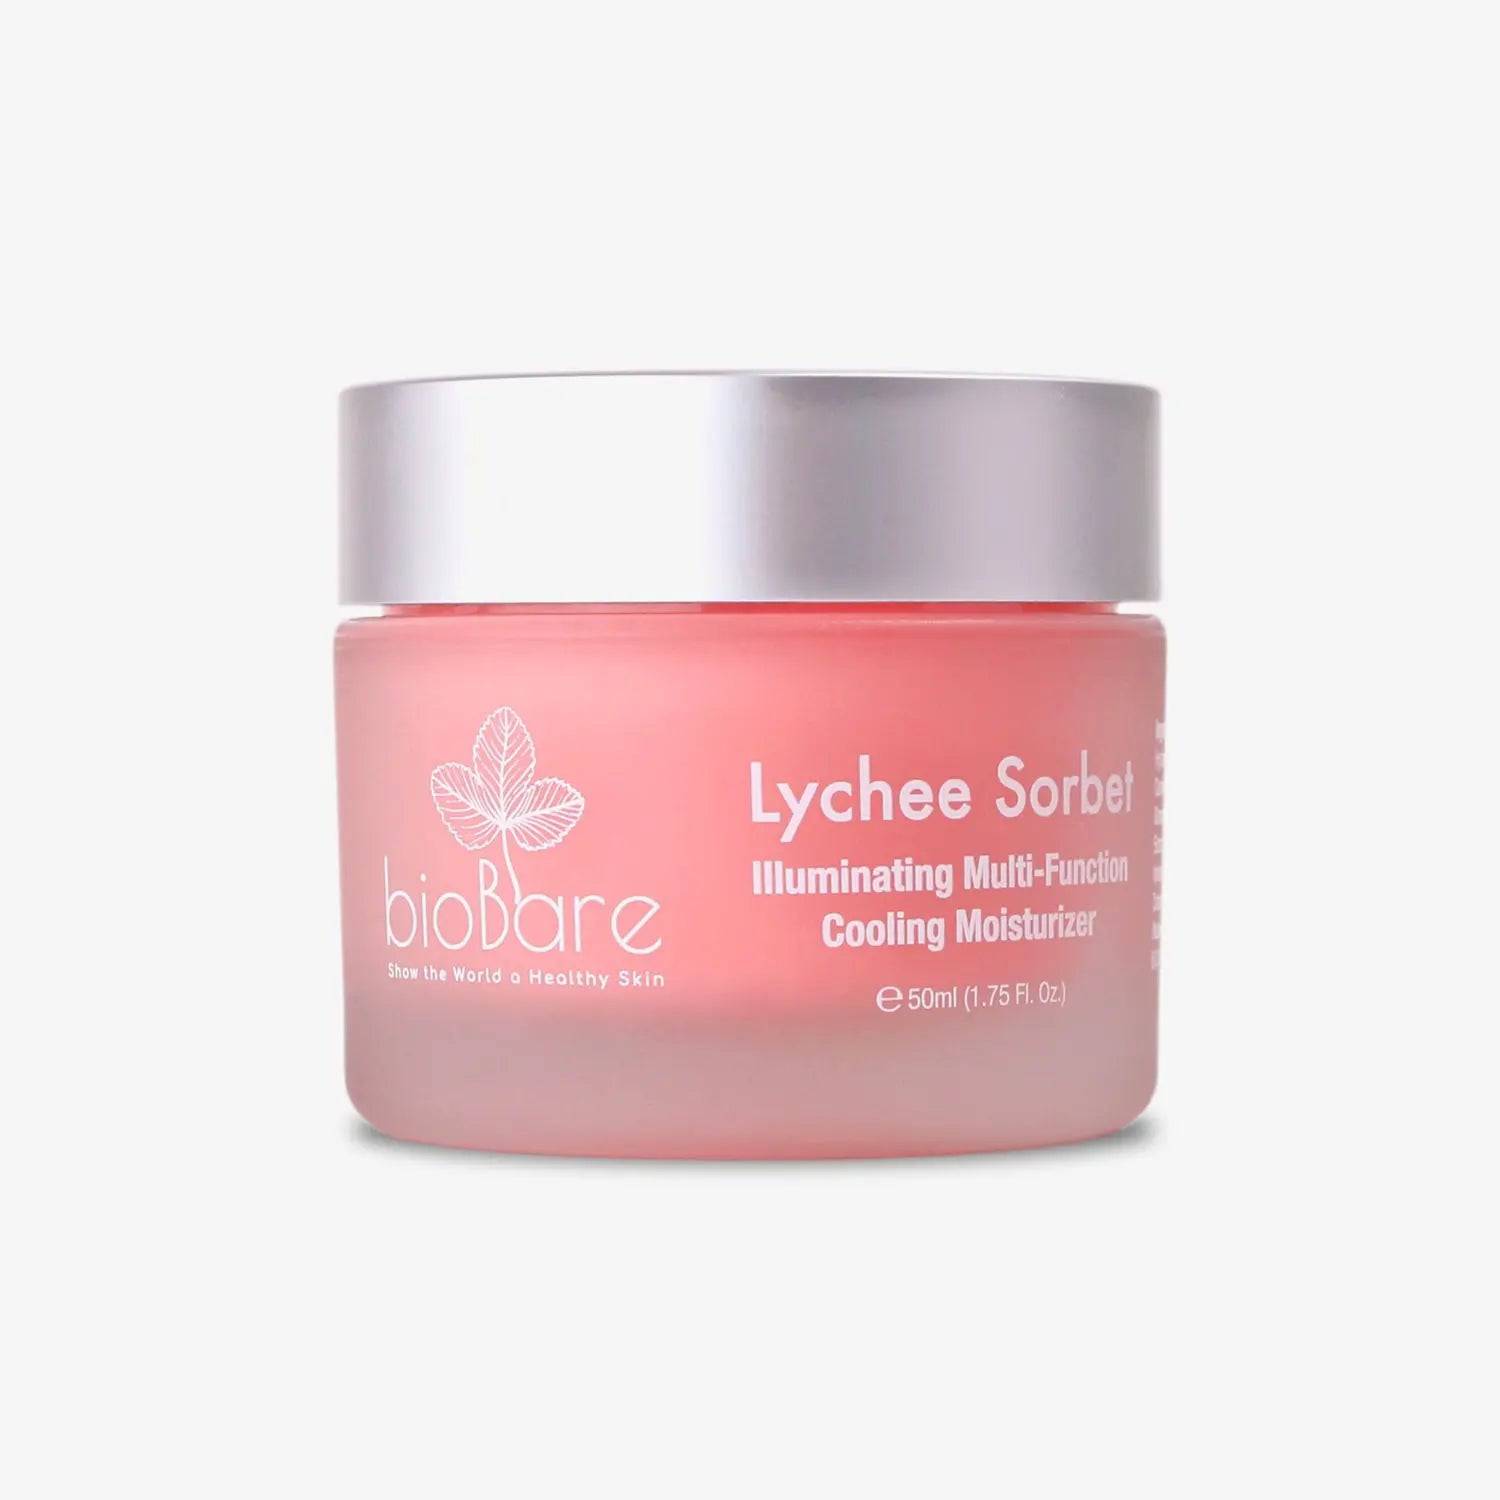 Image of LYCHEE SORBET™ Illuminating Multi-Function Cooling Moisturizer Cooling Moisturize @ 50ml 1.75F1.0z RUTHU TR TP Healthy Skin 